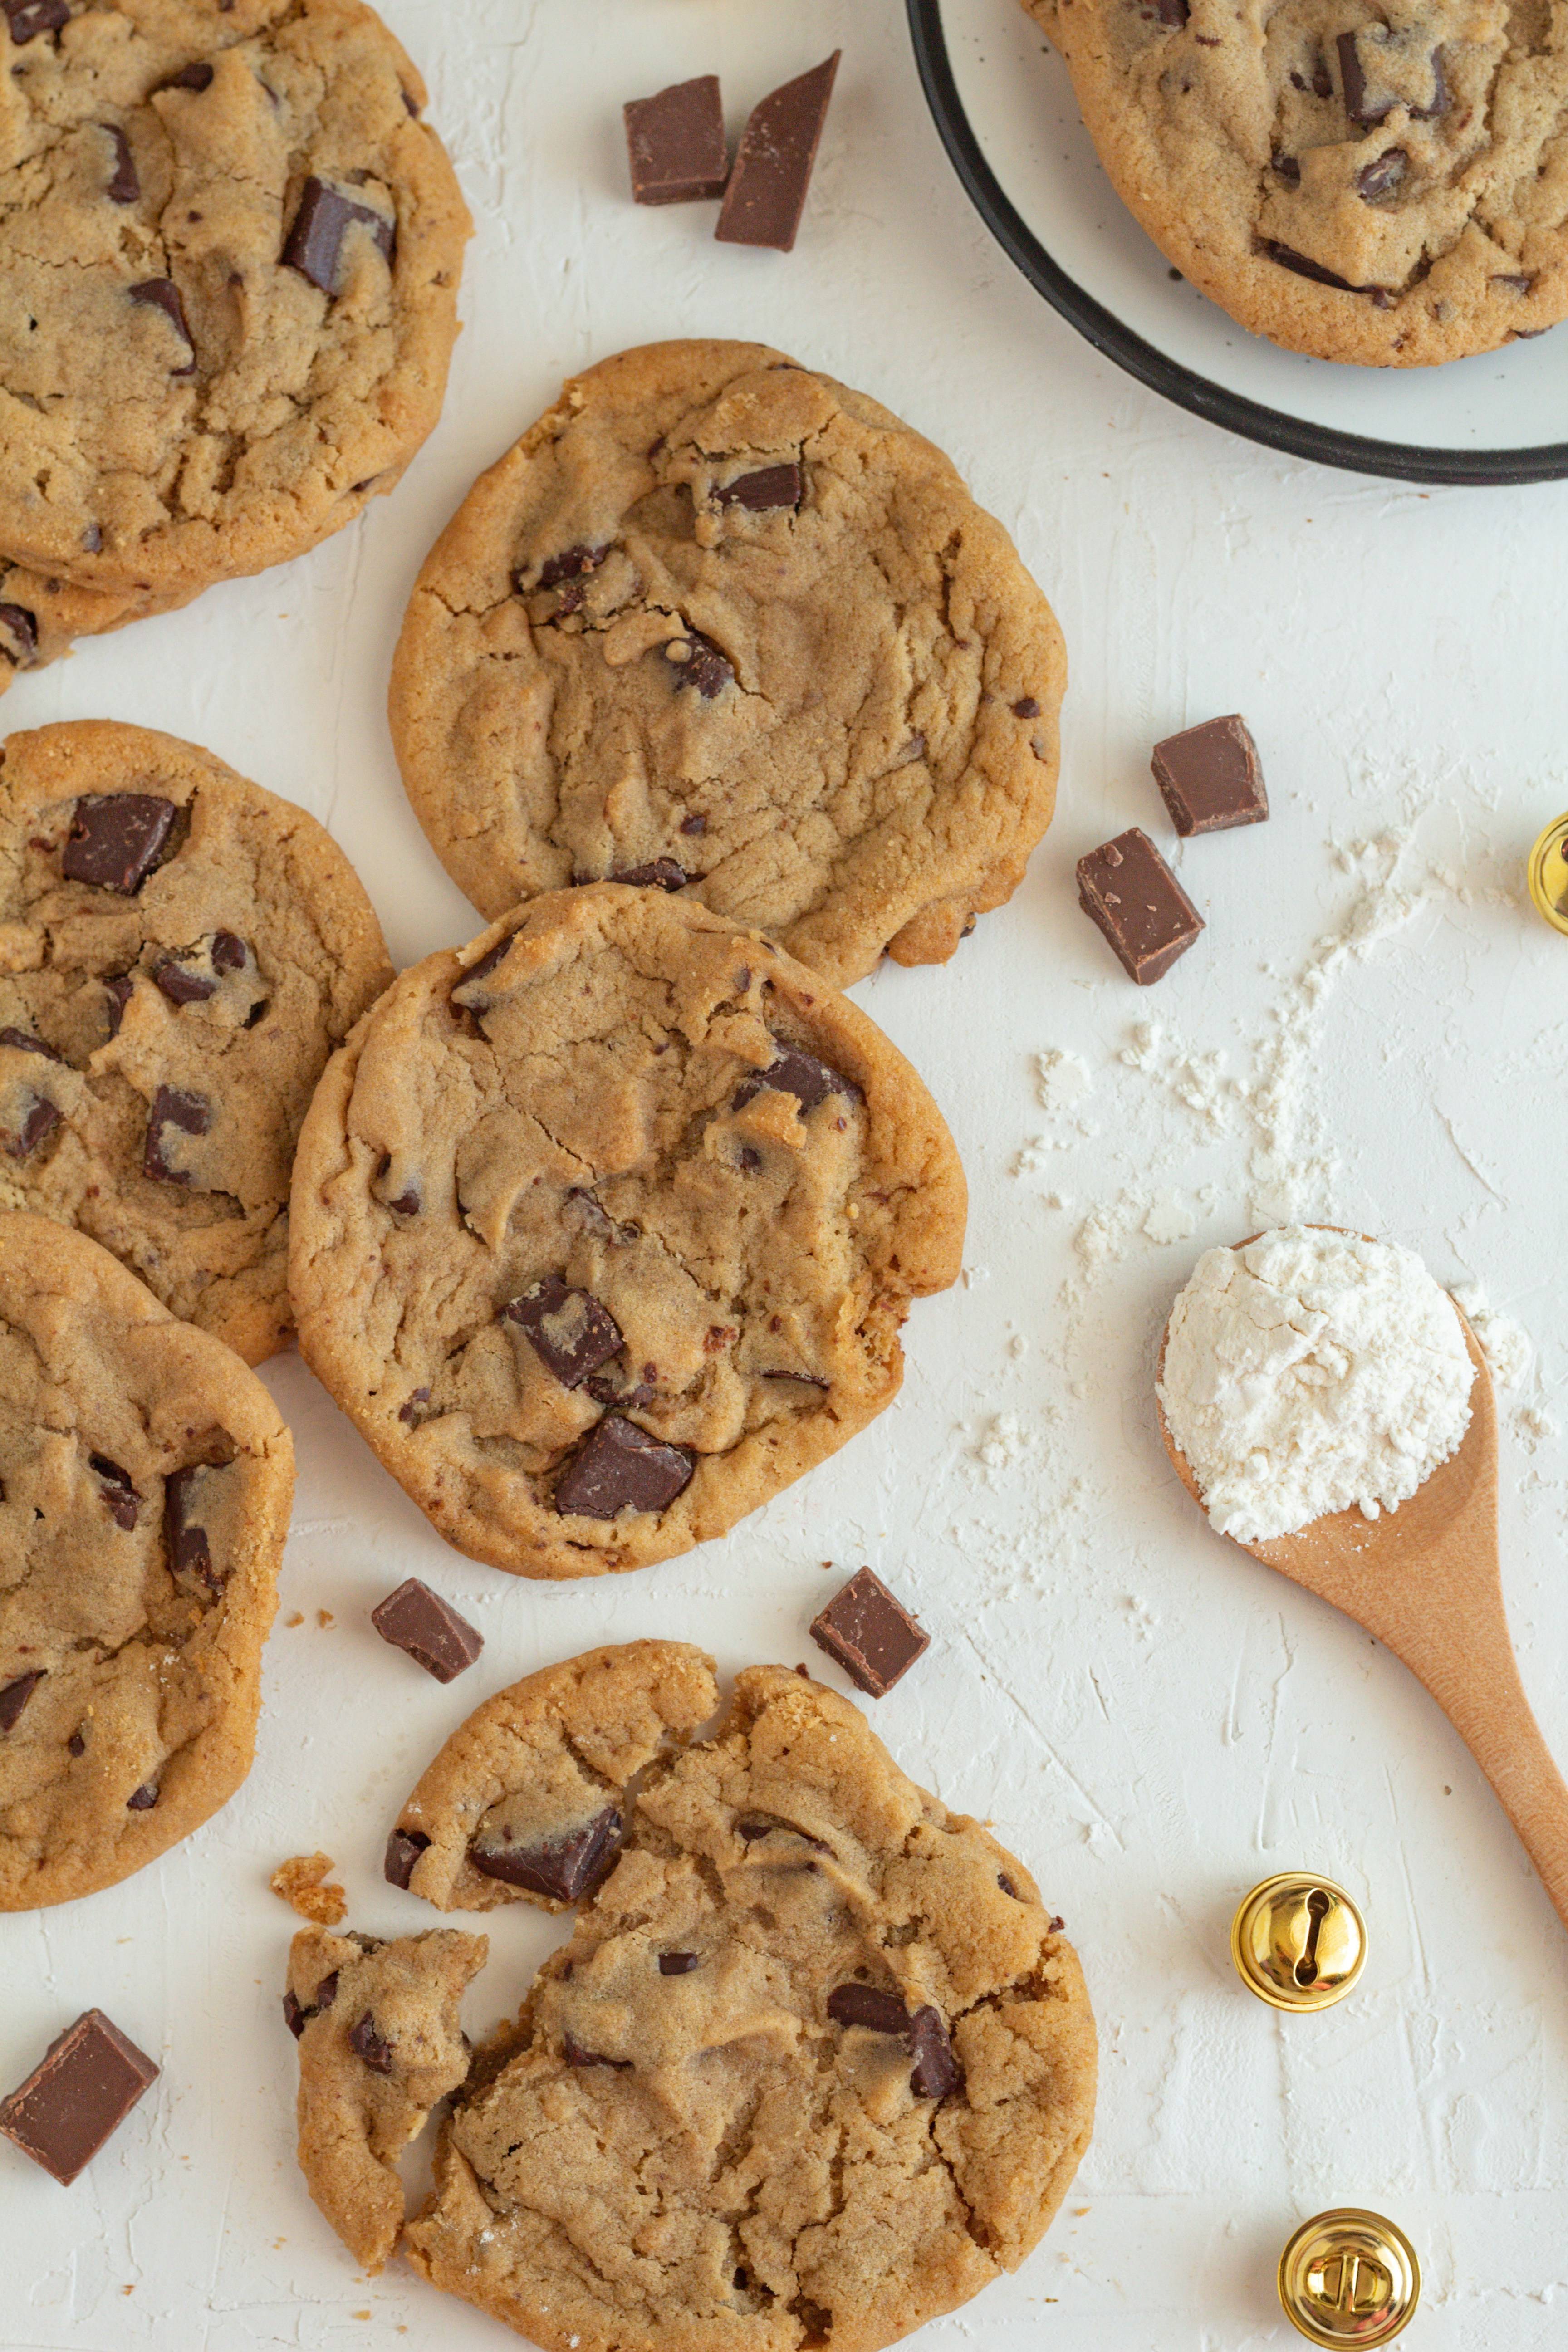 The Best Comprehensive Step-by-Step Cookie Baking Guide